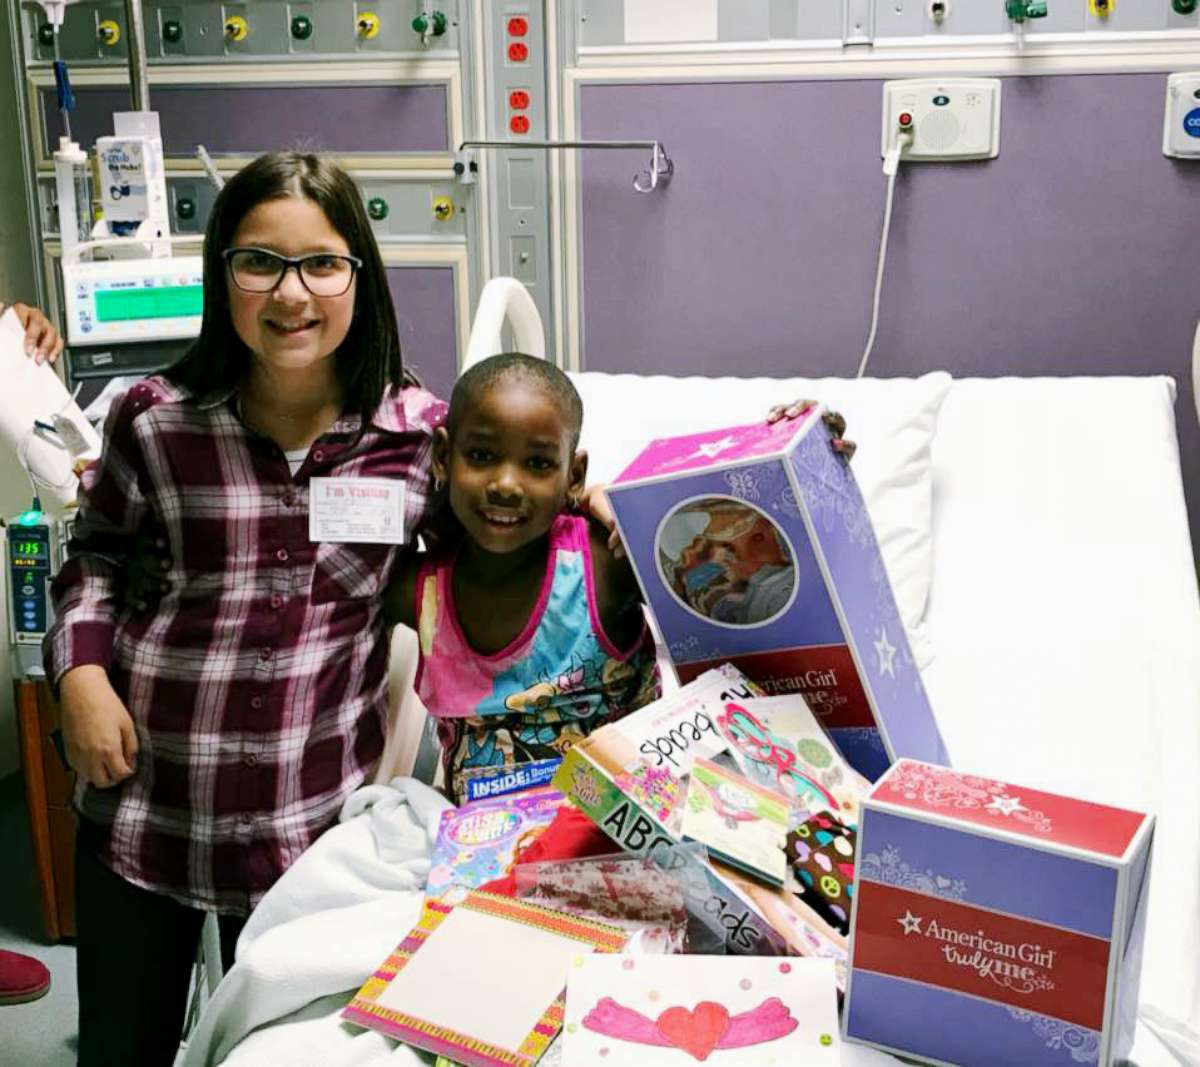 PHOTO: Bella Fricker, 11, is seen in 2017 with Nevaeh Williams, 10, who is currently in remission after fighting a rare cancer called desmoplastic small round cell tumor, or DSRCT.